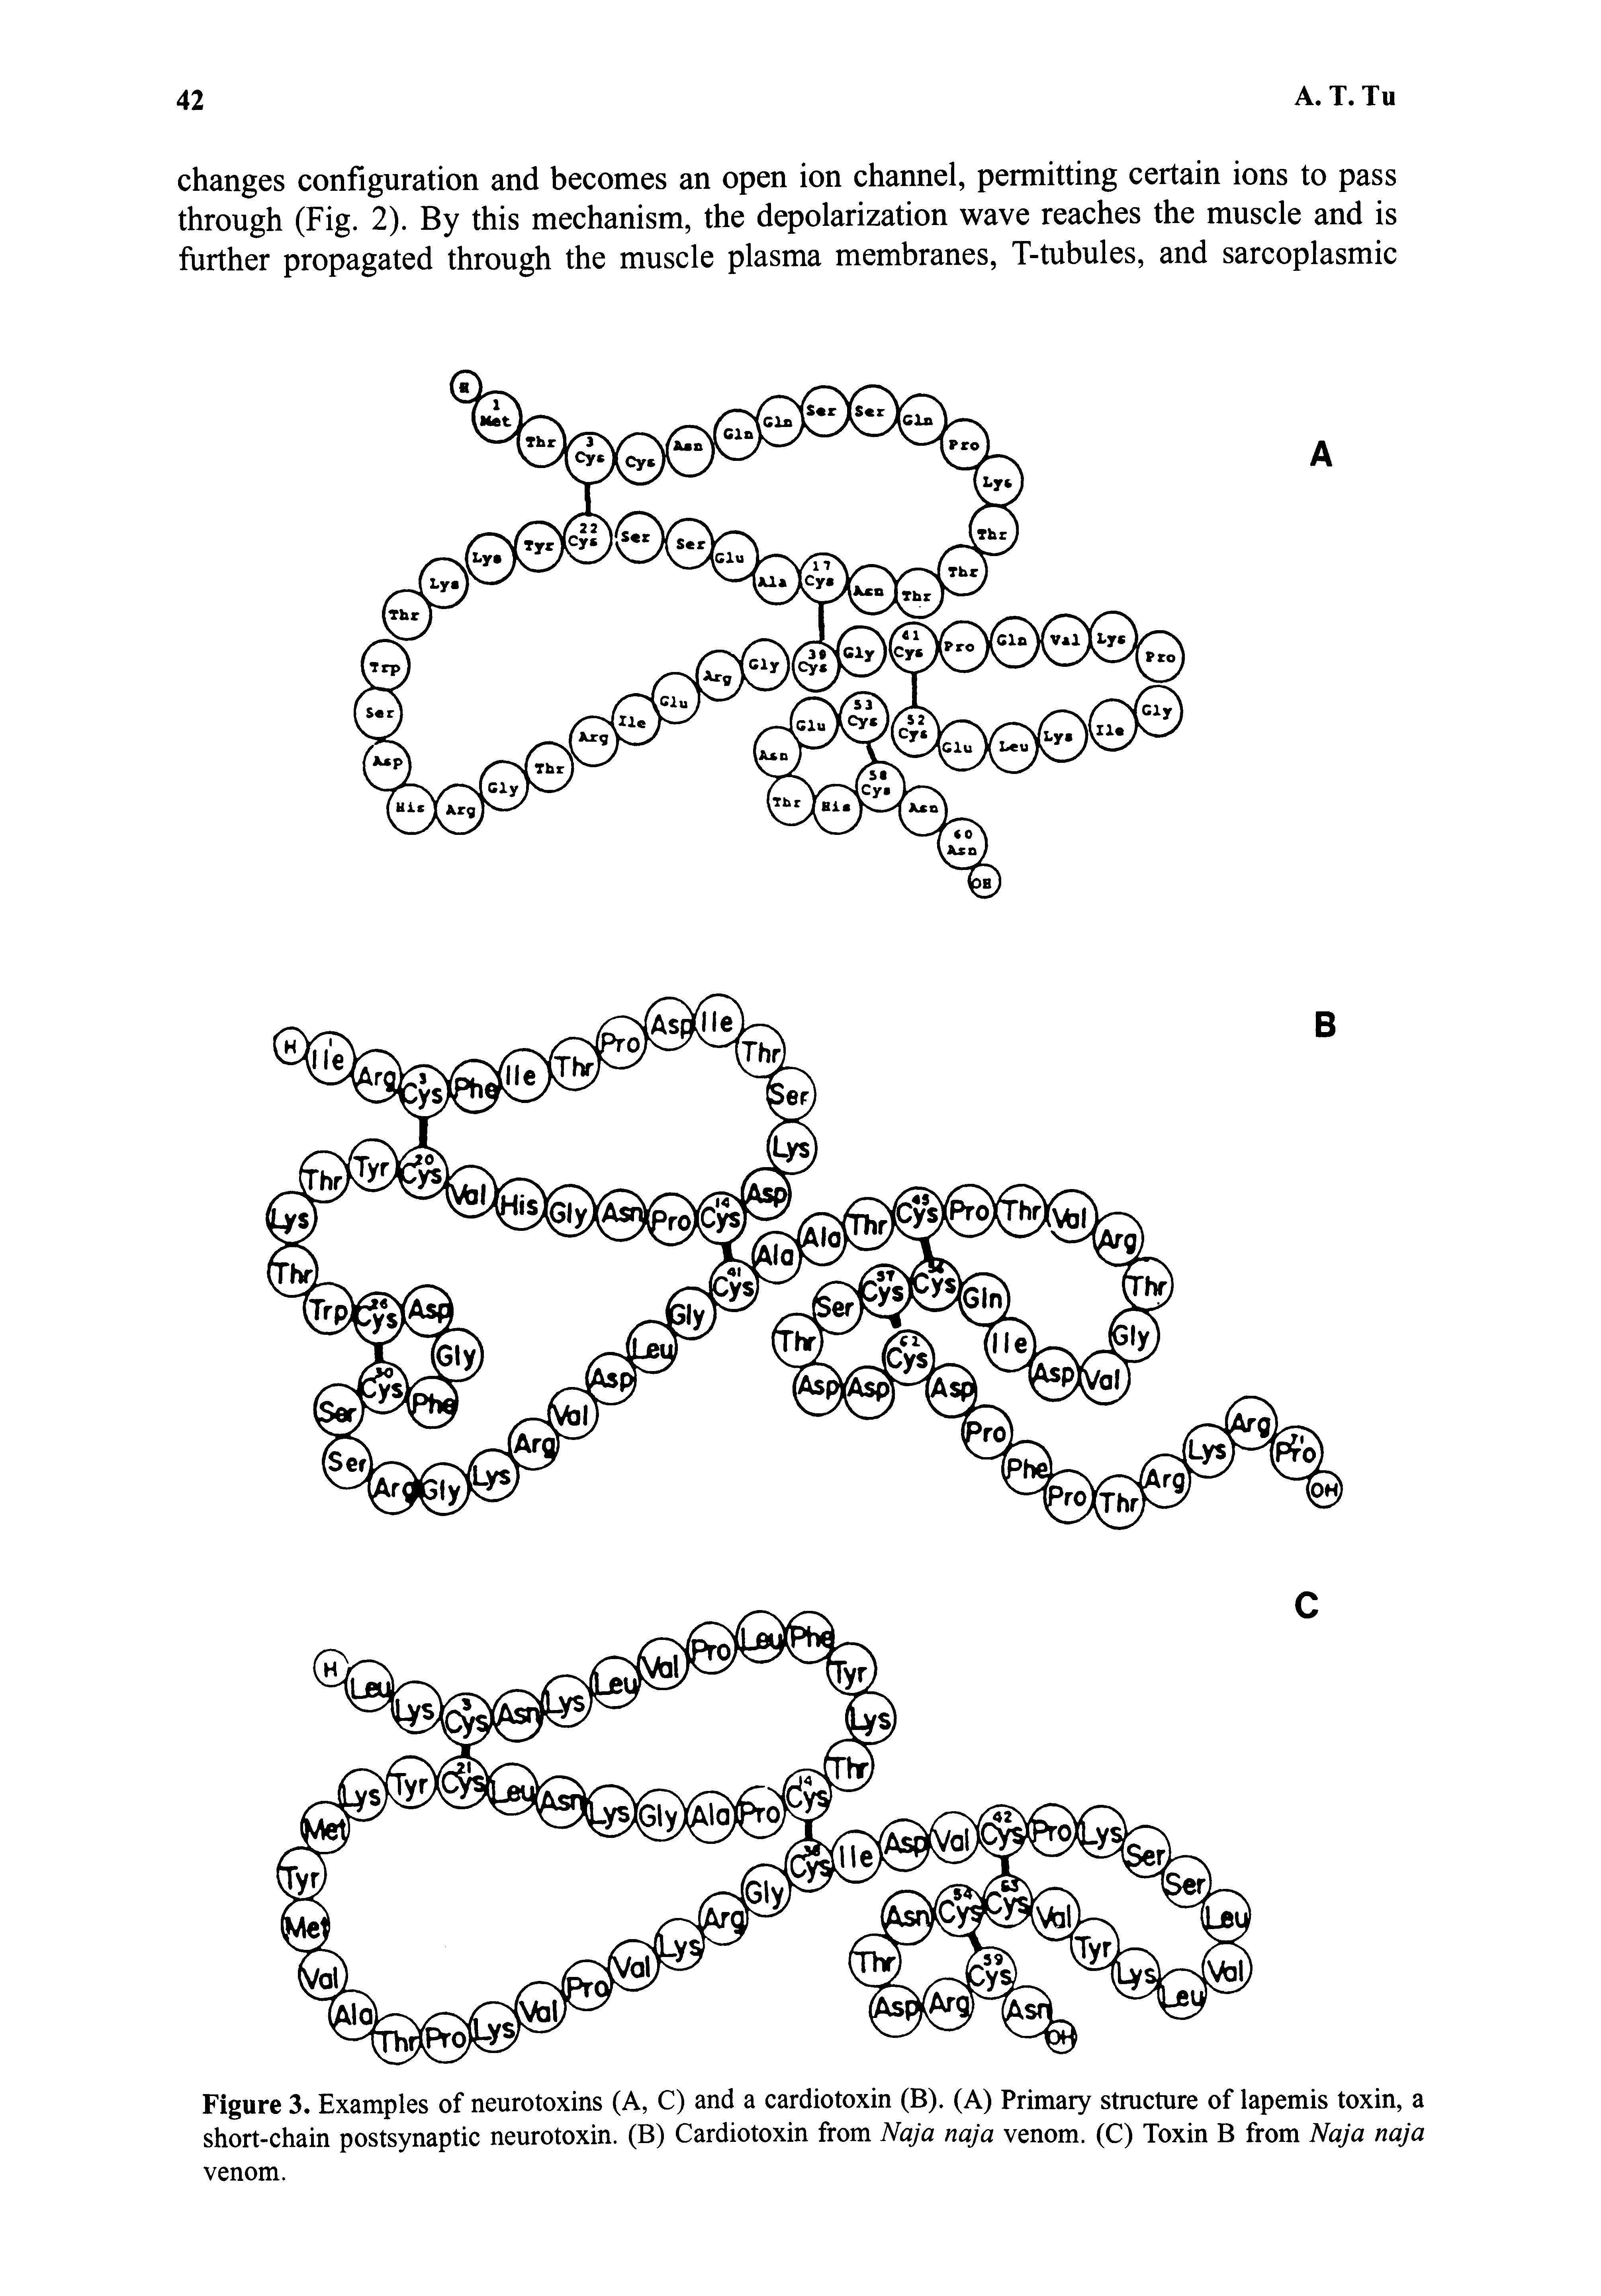 Figure 3. Examples of neurotoxins (A, C) and a cardiotoxin (B). (A) Primary structure of lapemis toxin, a short-chain postsynaptic neurotoxin. (B) Cardiotoxin from Naja naja venom. (C) Toxin B from Naja naja venom.